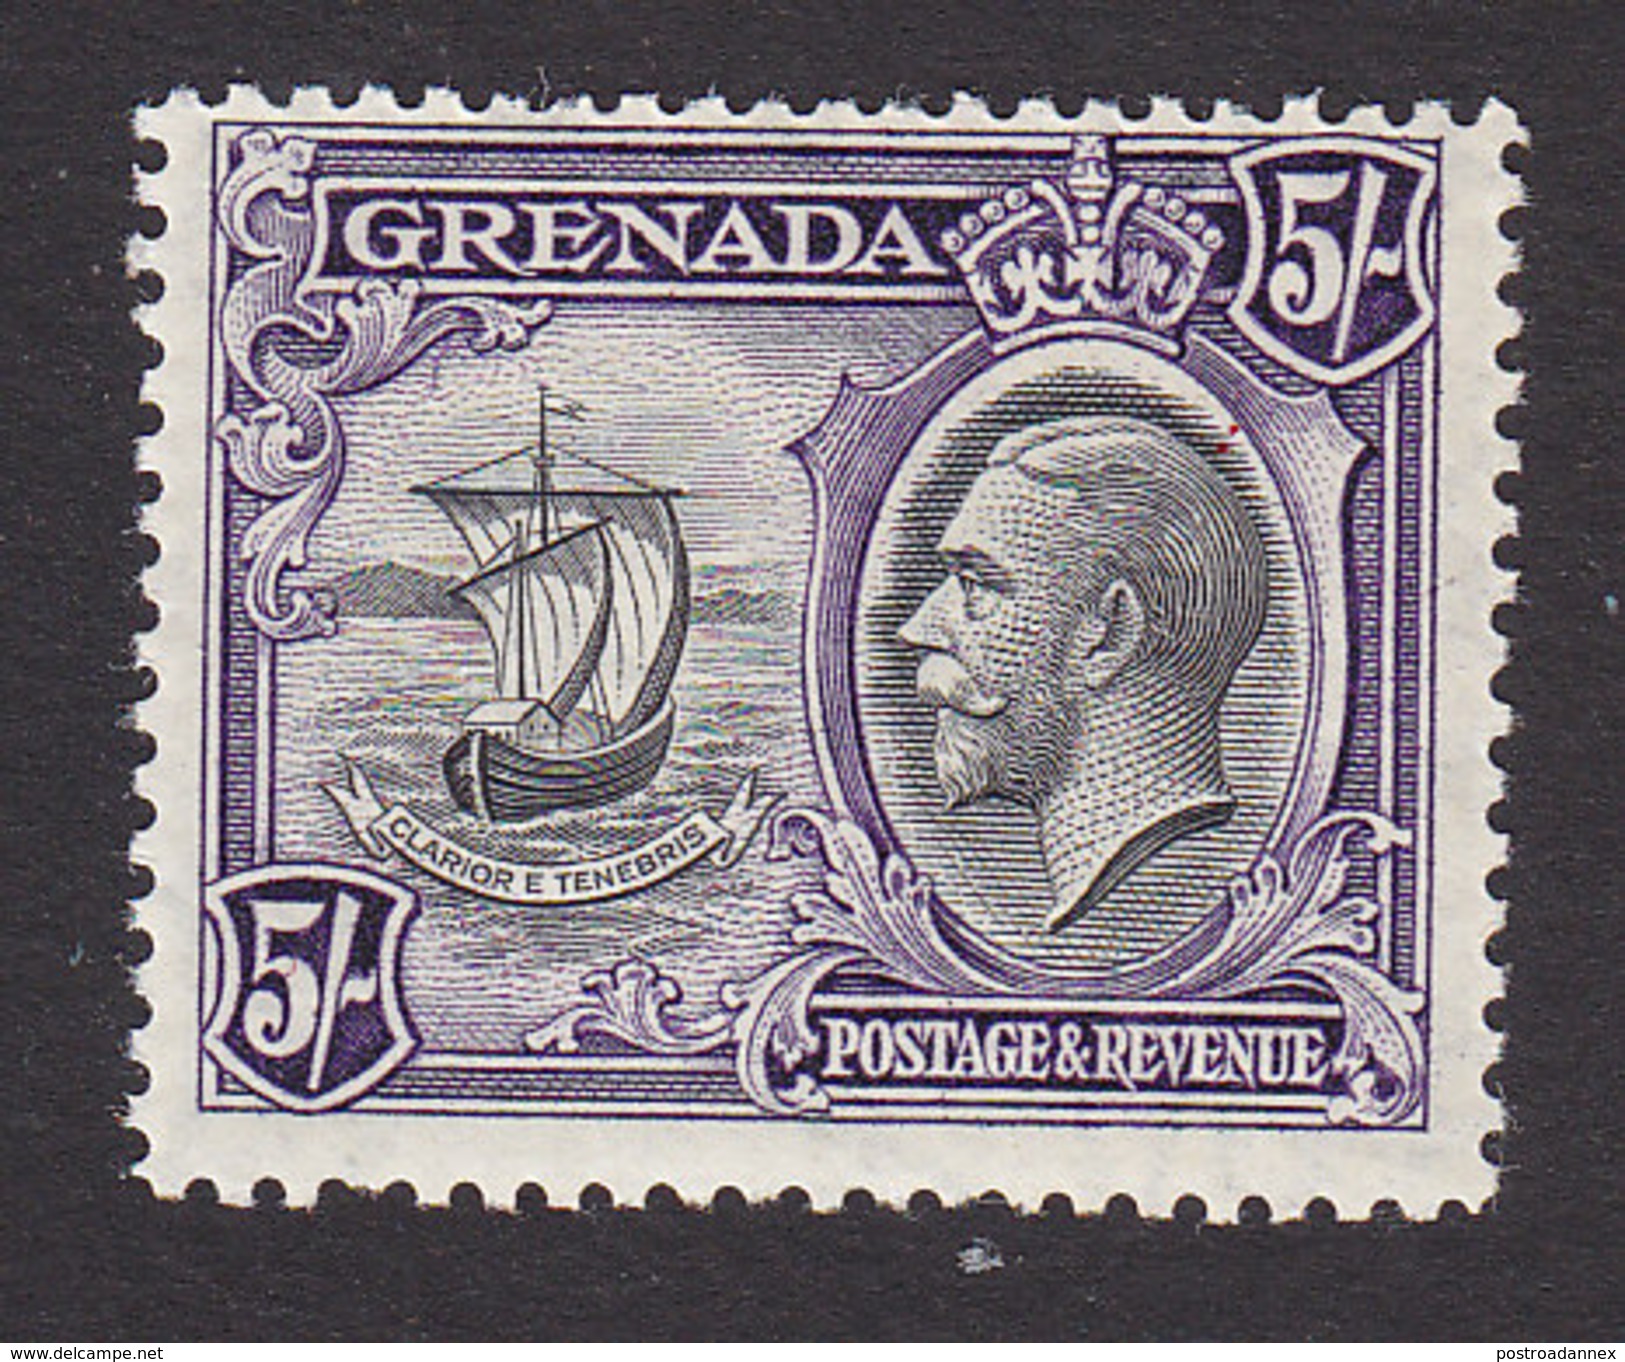 Grenada, Scott #123, Mint Hinged, Seal Of The Colony, Issued 1934 - Grenade (...-1974)